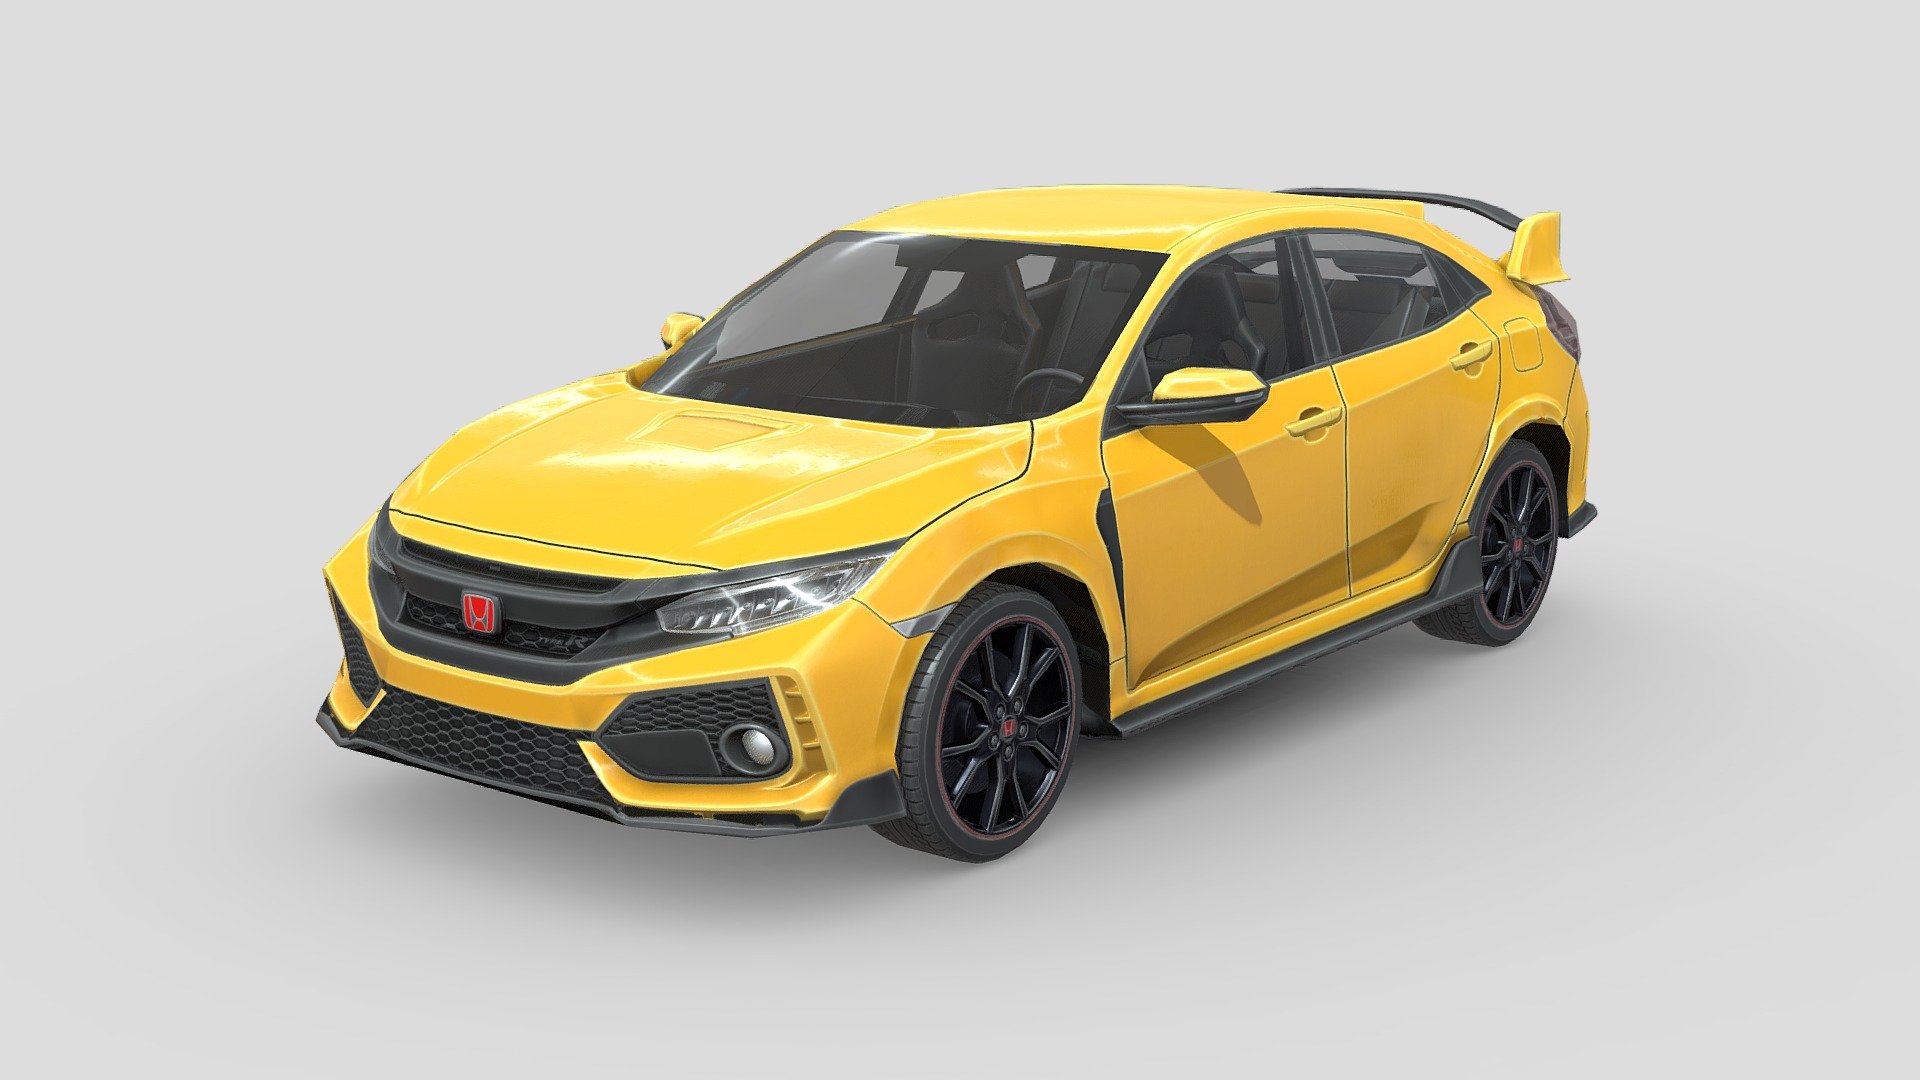 Low Poly Car - Honda Civic Type R 2018. Nice geometry and surface flow 3d model